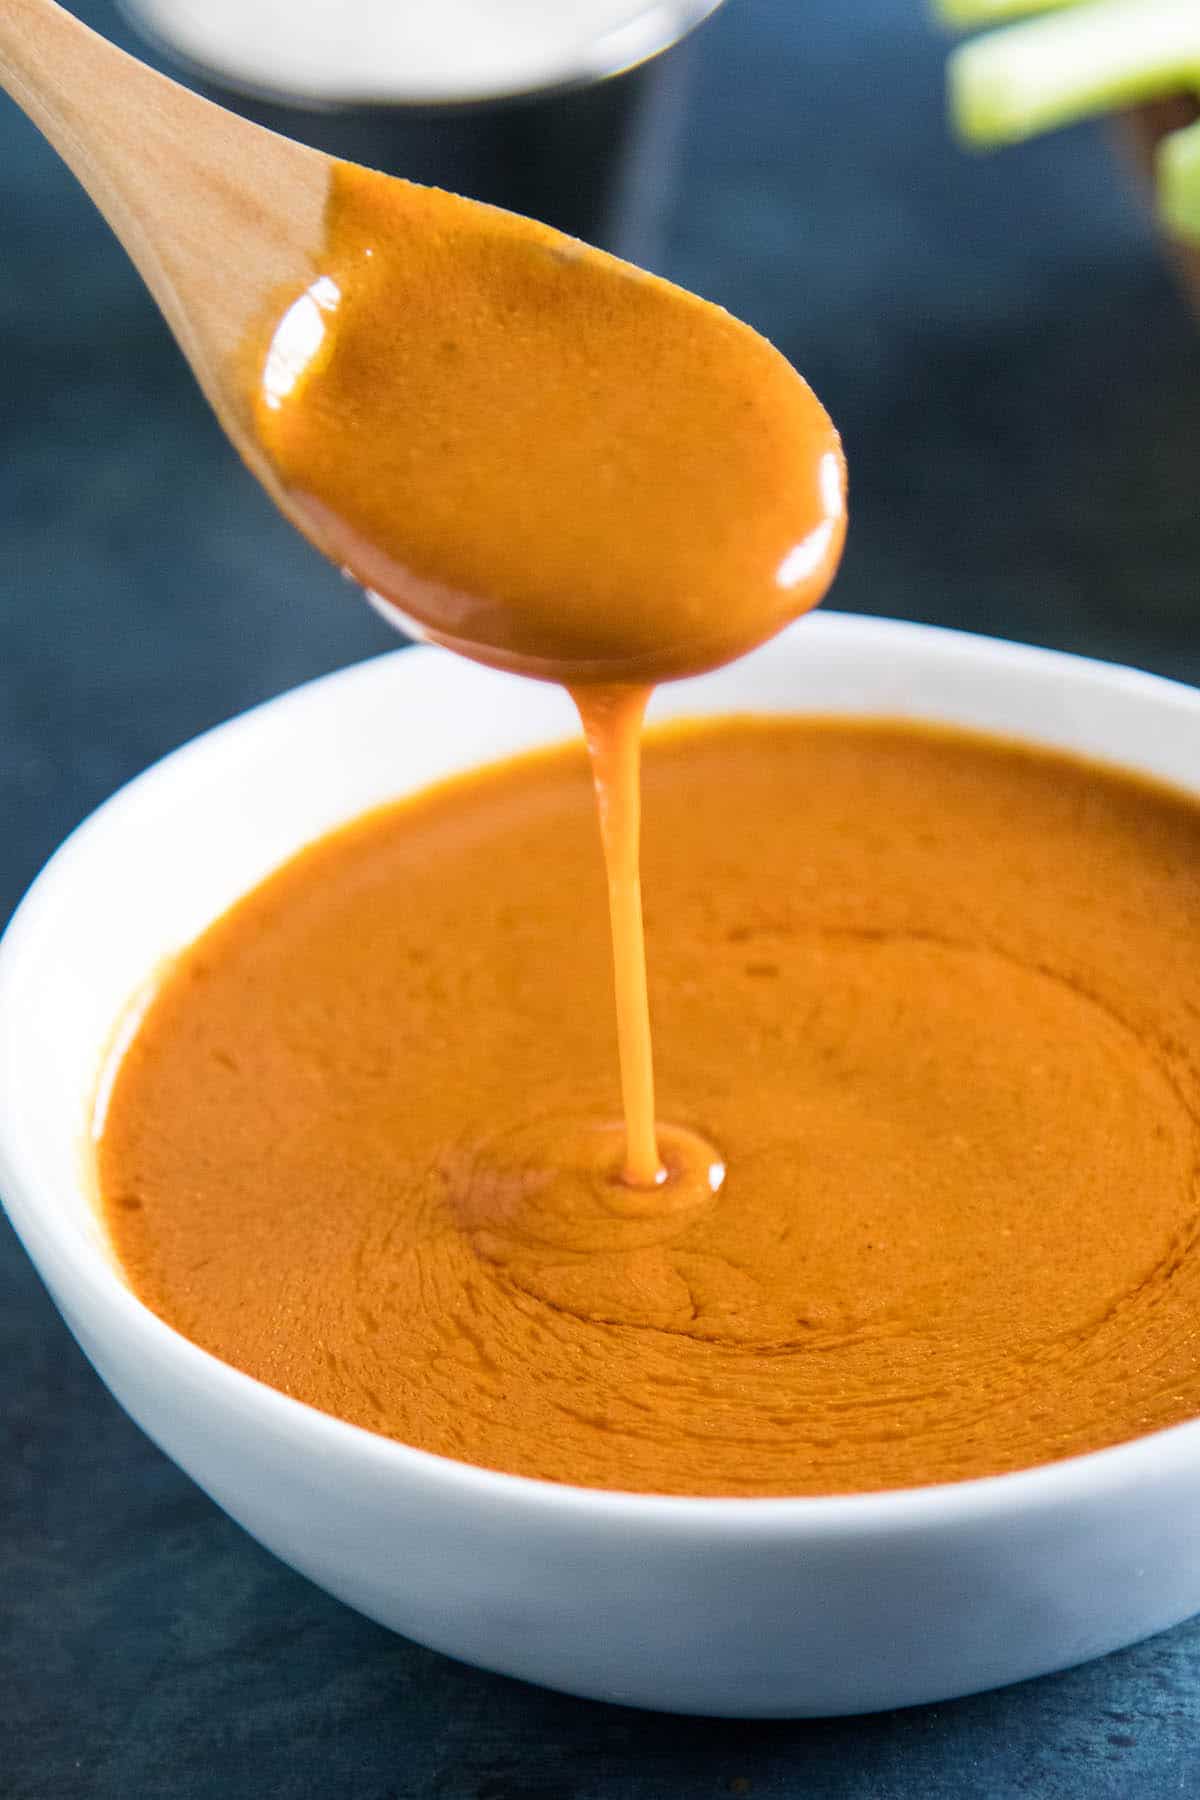 A spoonful of the delicious Buffalo sauce